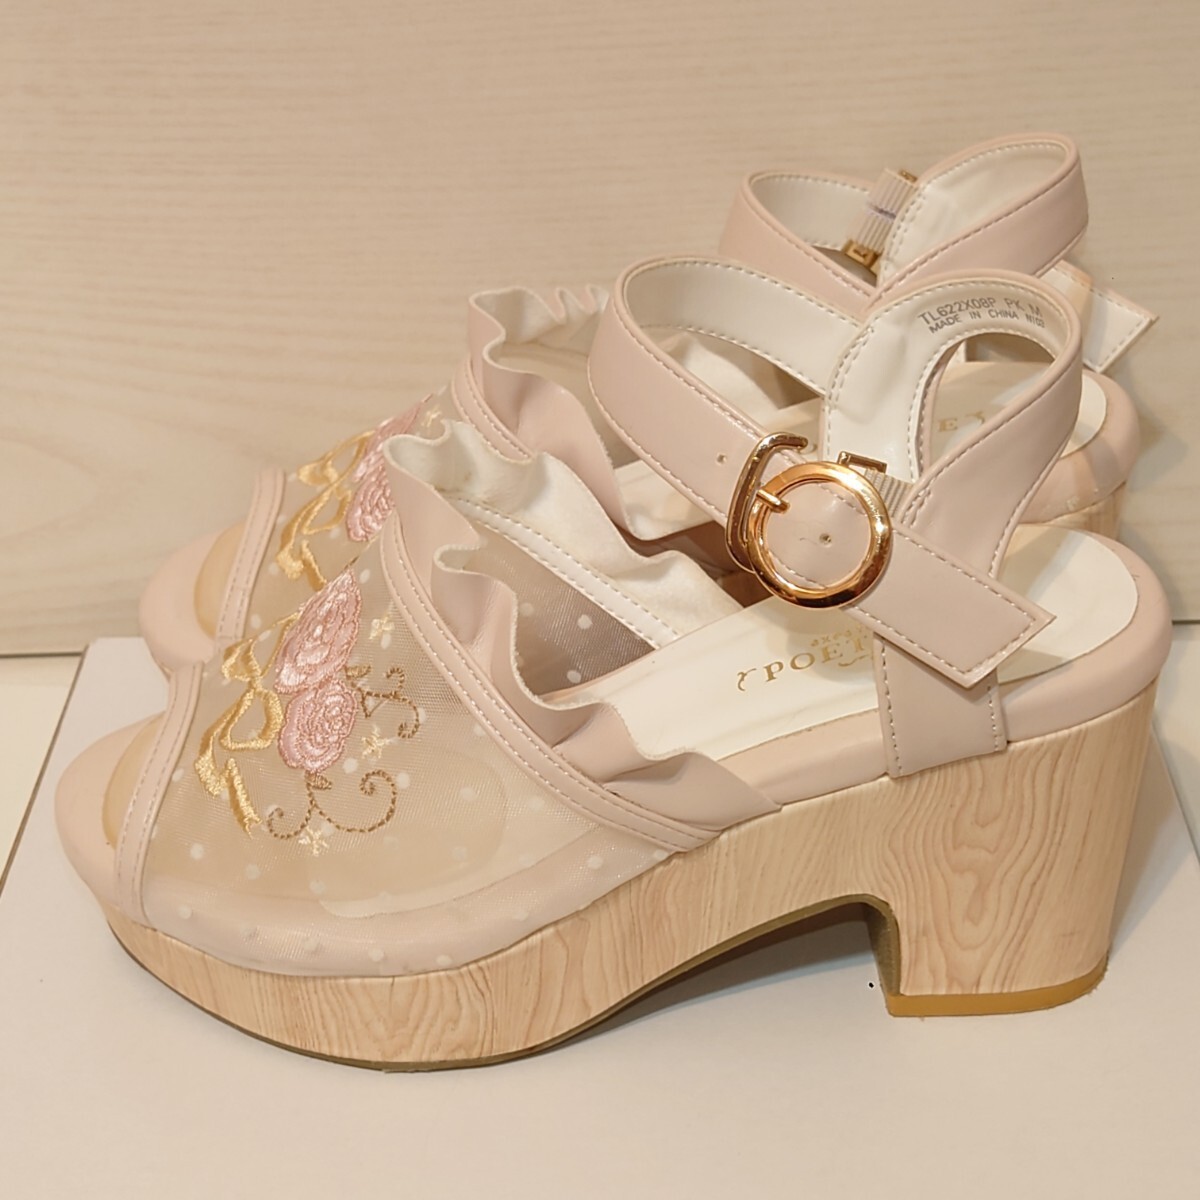  axes femme axes femmepoetik pink sandals chu-ru sandals rose. embroidery Wedge sole M size beautiful goods 